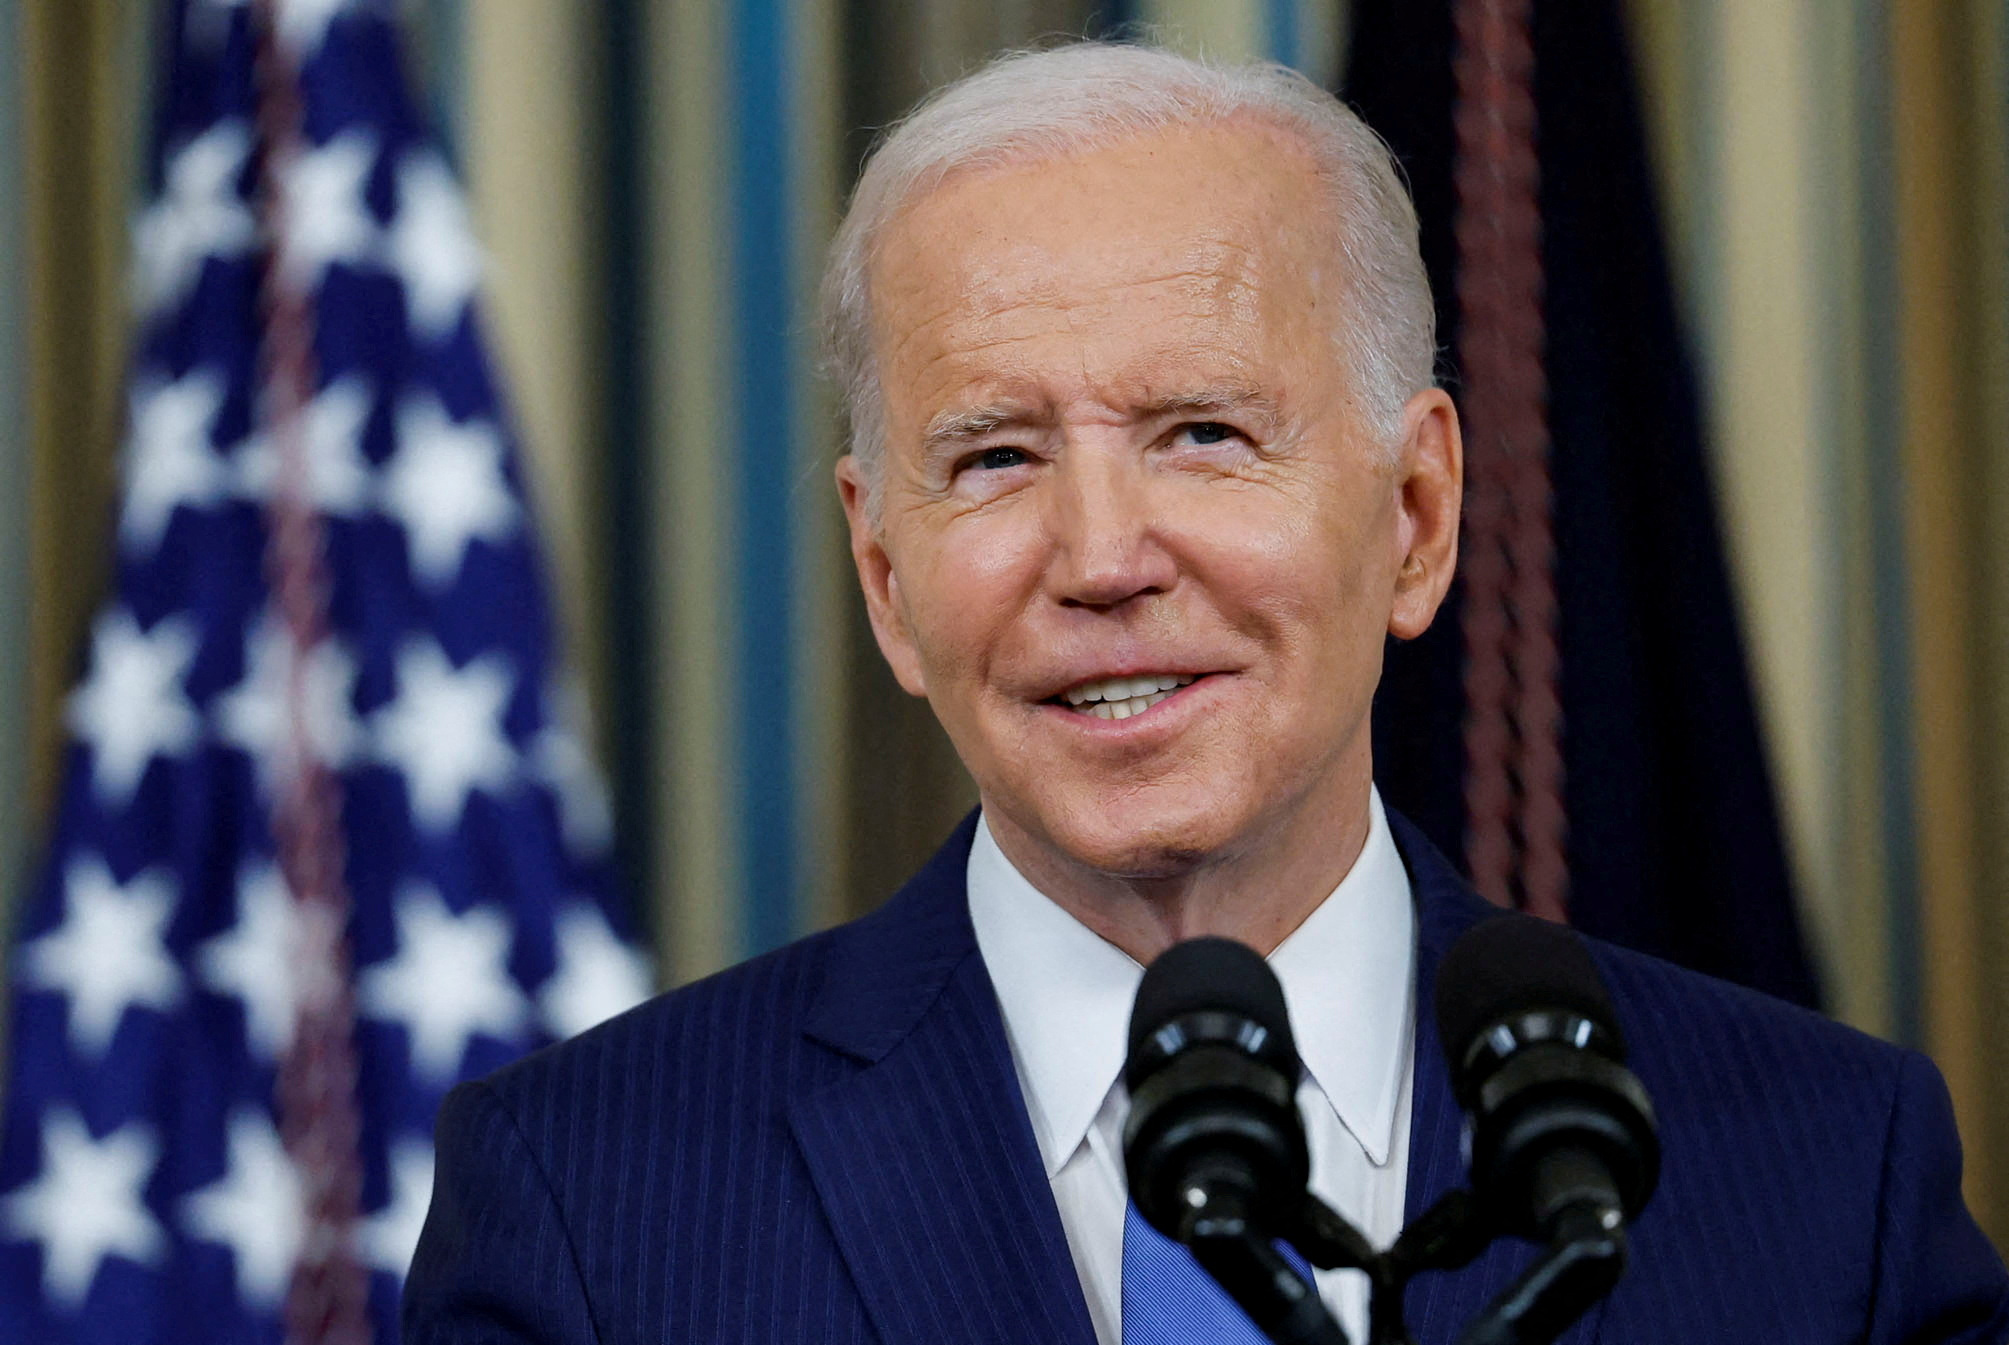 U.S. President Joe Biden holds White House news conference to discuss the 2022 midterm election results in Washington